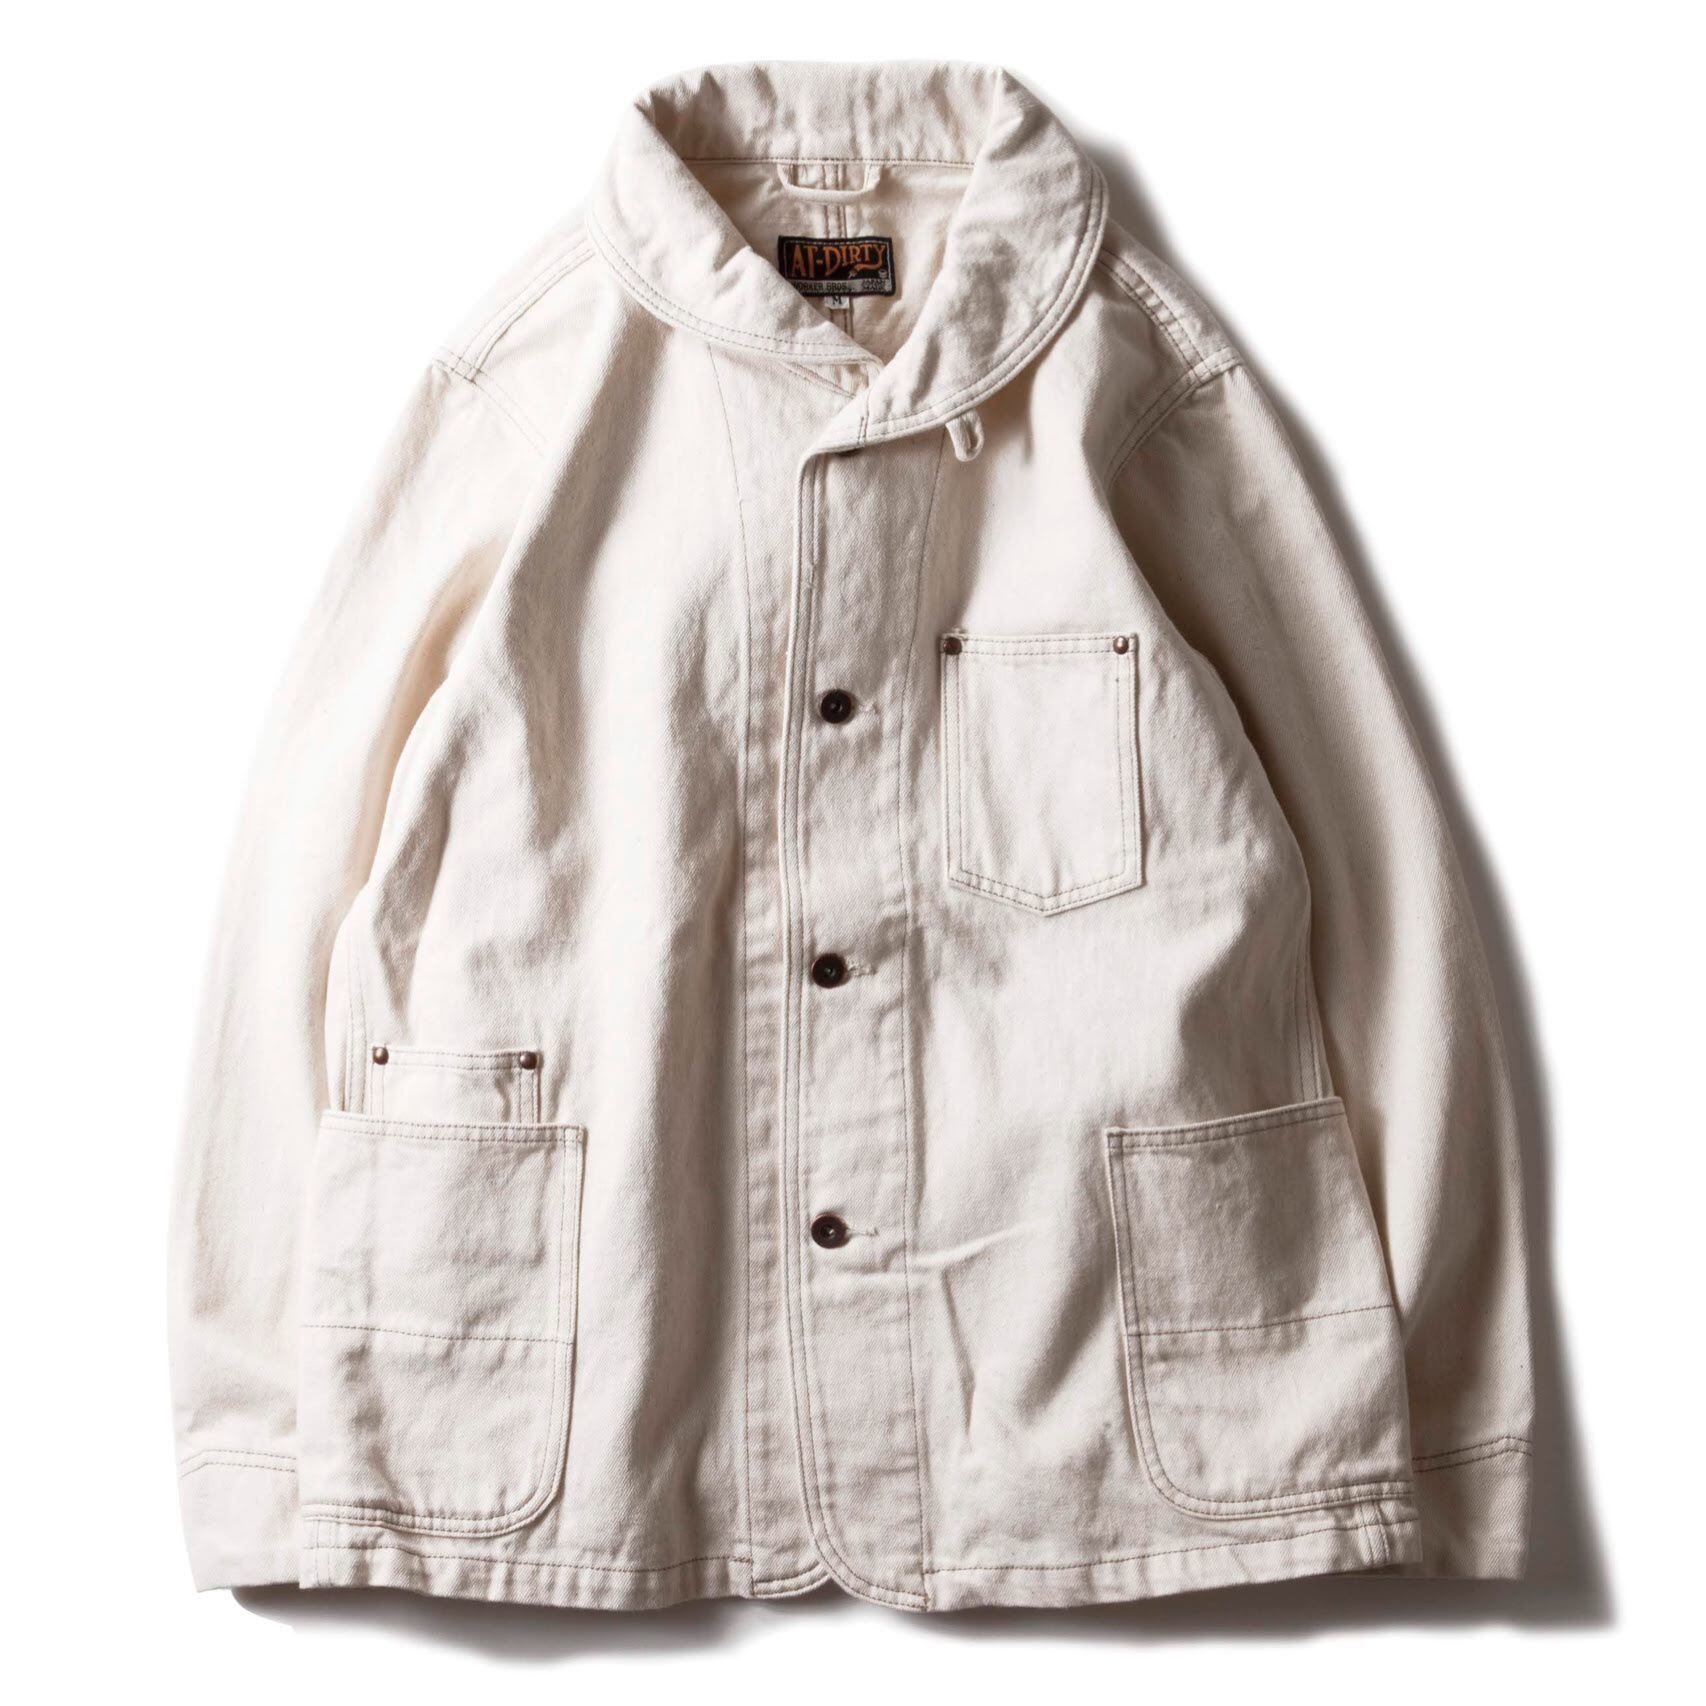 AT-DIRTY(アットダーティー) WORKERS JACKET (IVORY) COMPANY